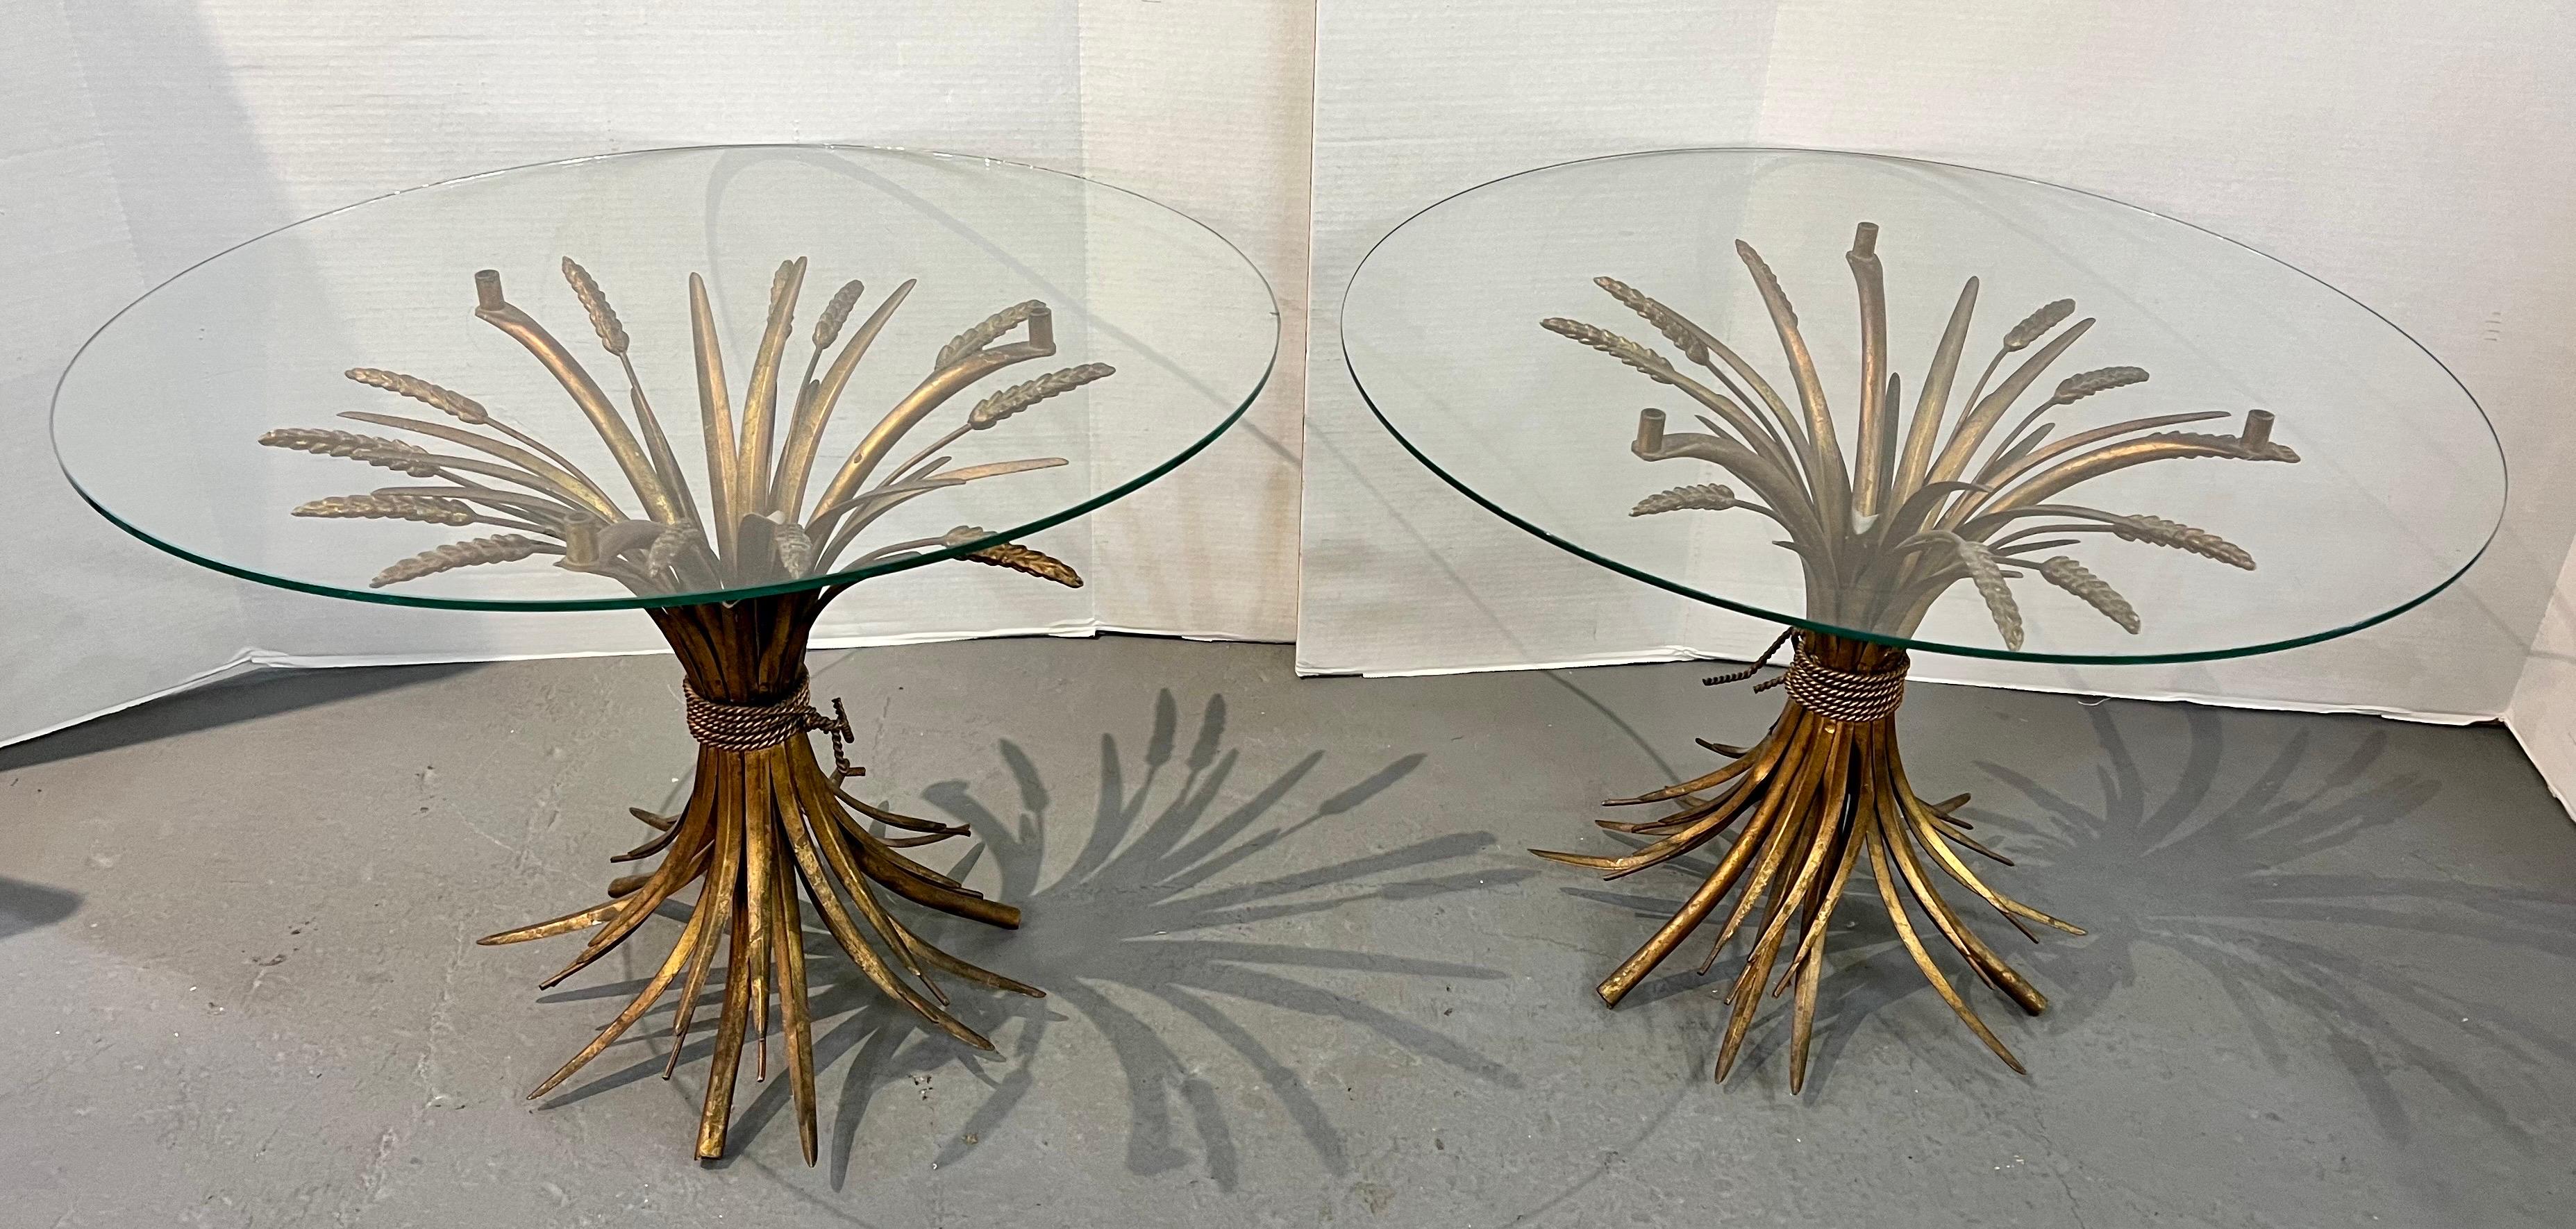 Sculpted from metal in a gold gilt finish, these Sheaf of Wheat side tables includes a sheaf-shaped base and a round clear glass tabletop.